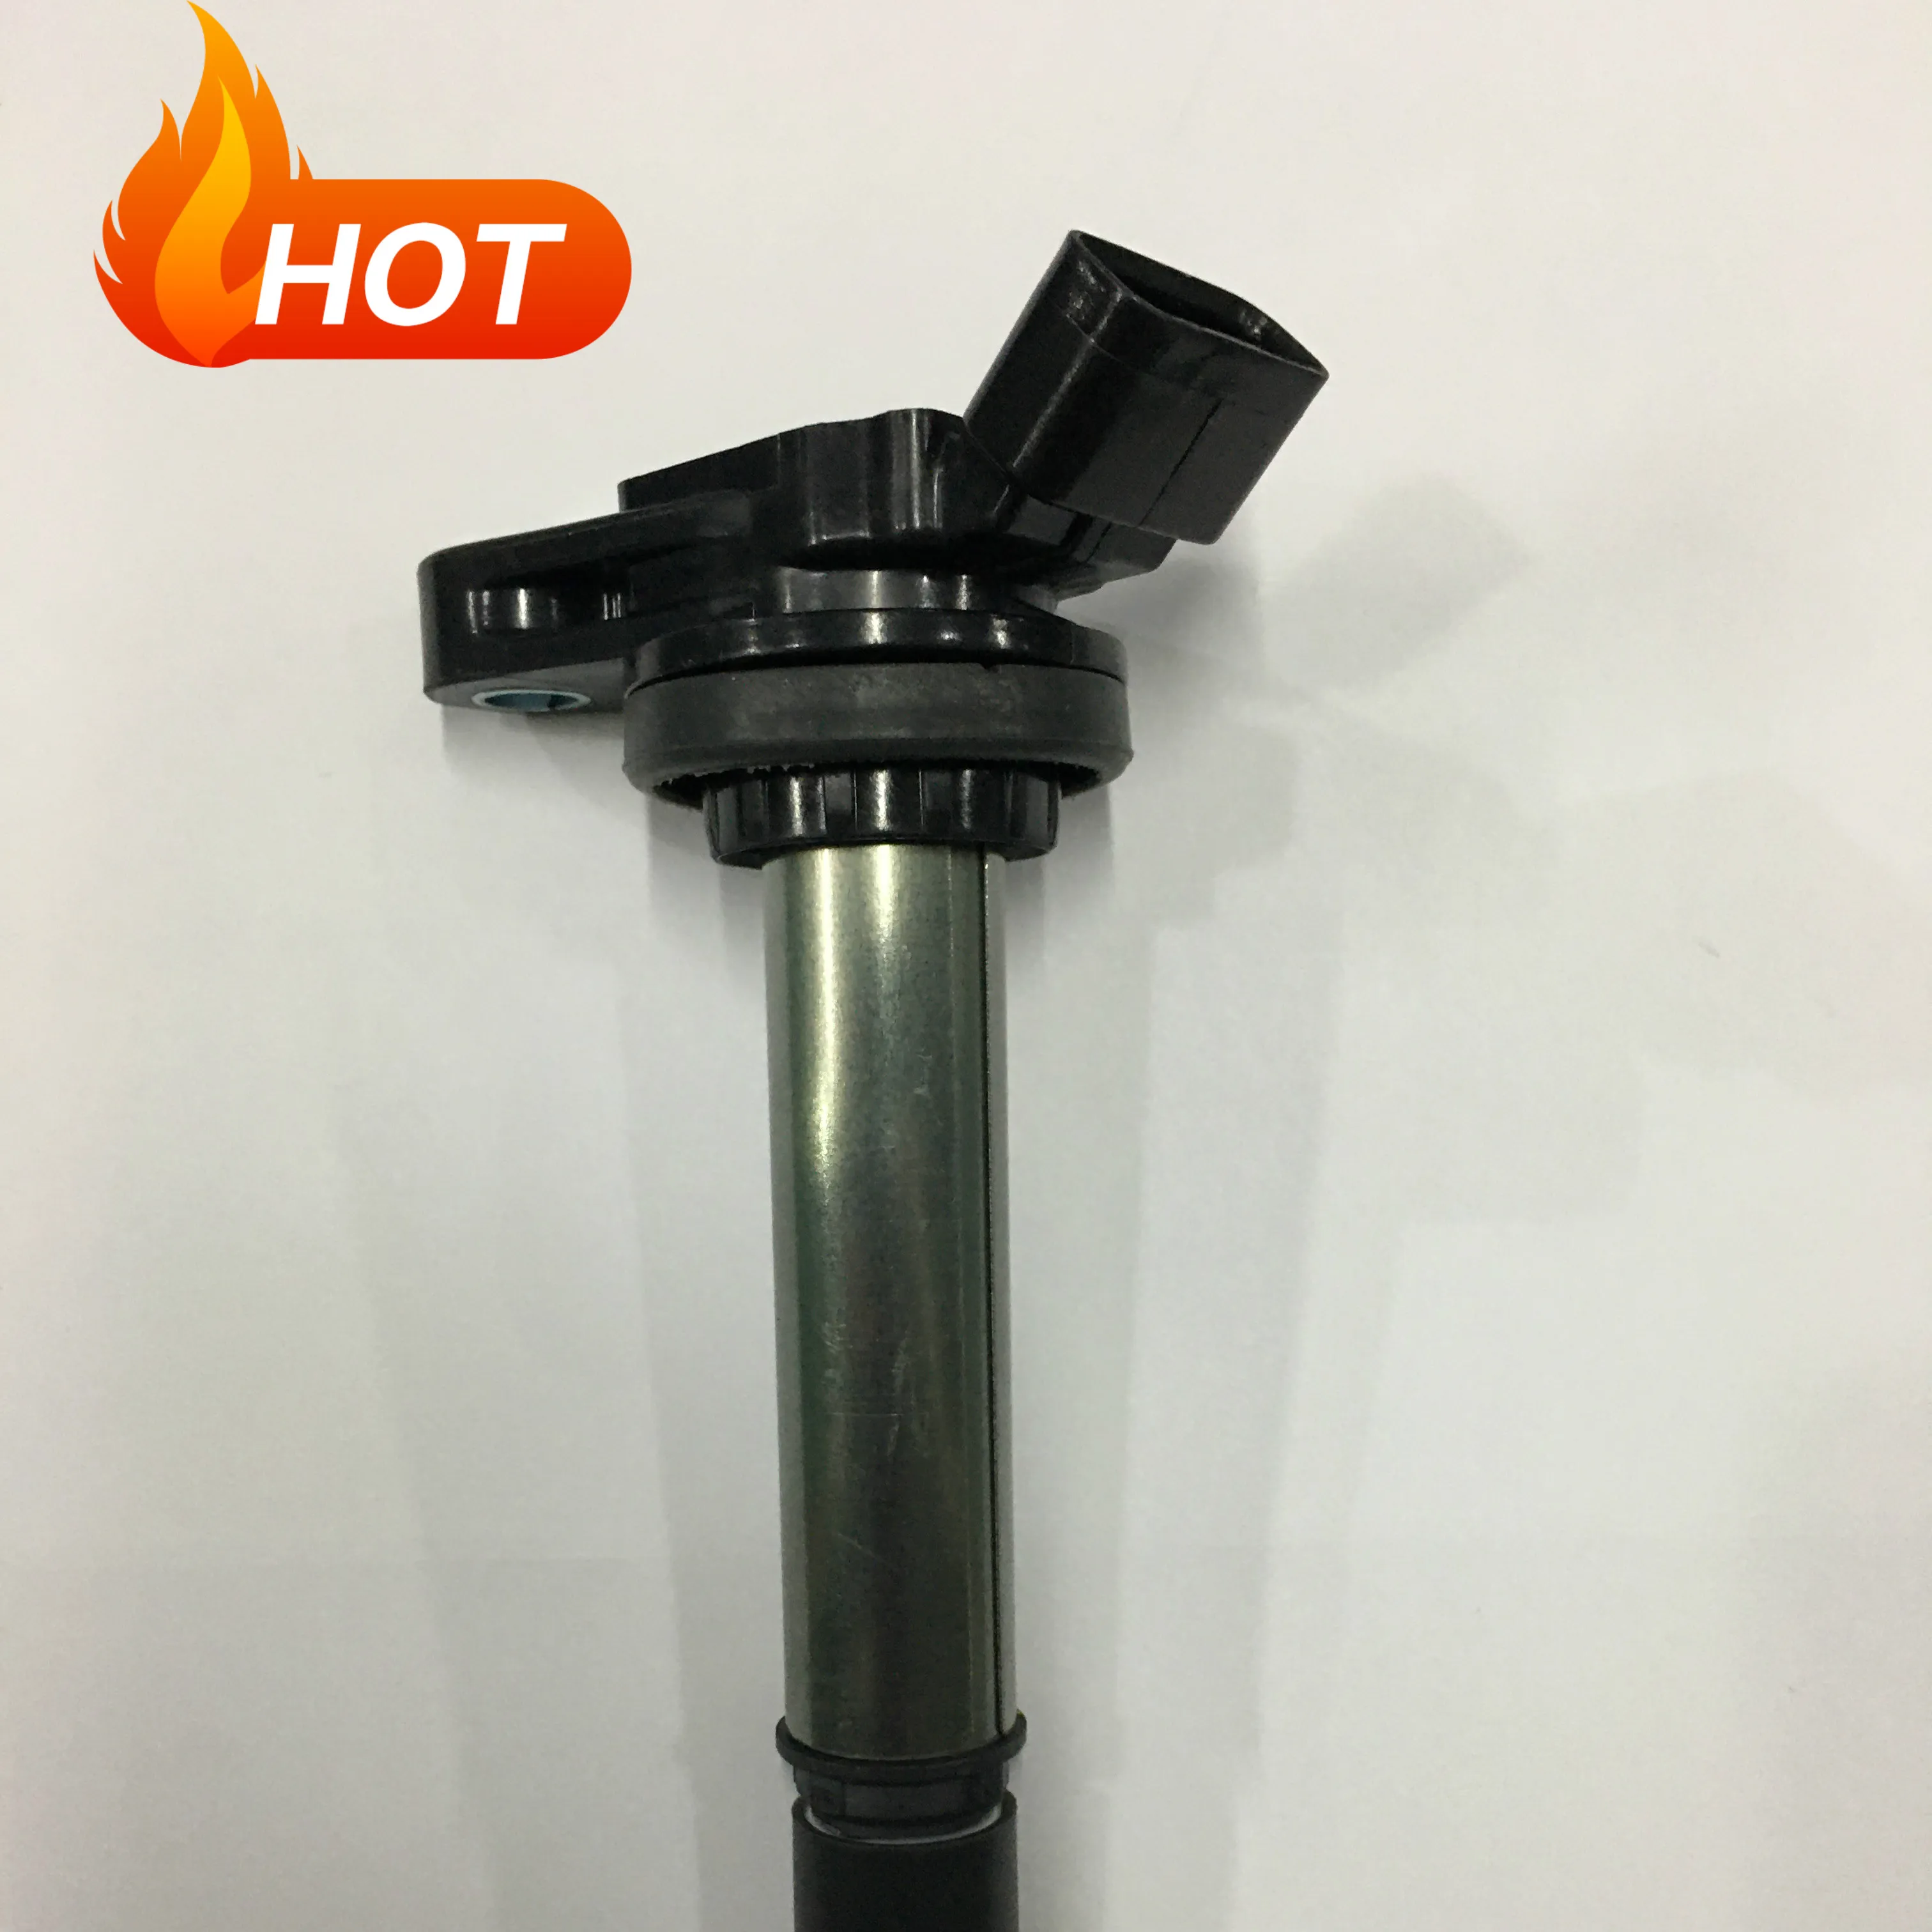 90919-C2003 90919-C2005 90919-02252 new car ignition_coil_for_toyota_corolla yaris 1nz 04 90919-02258 90919-02252 plug